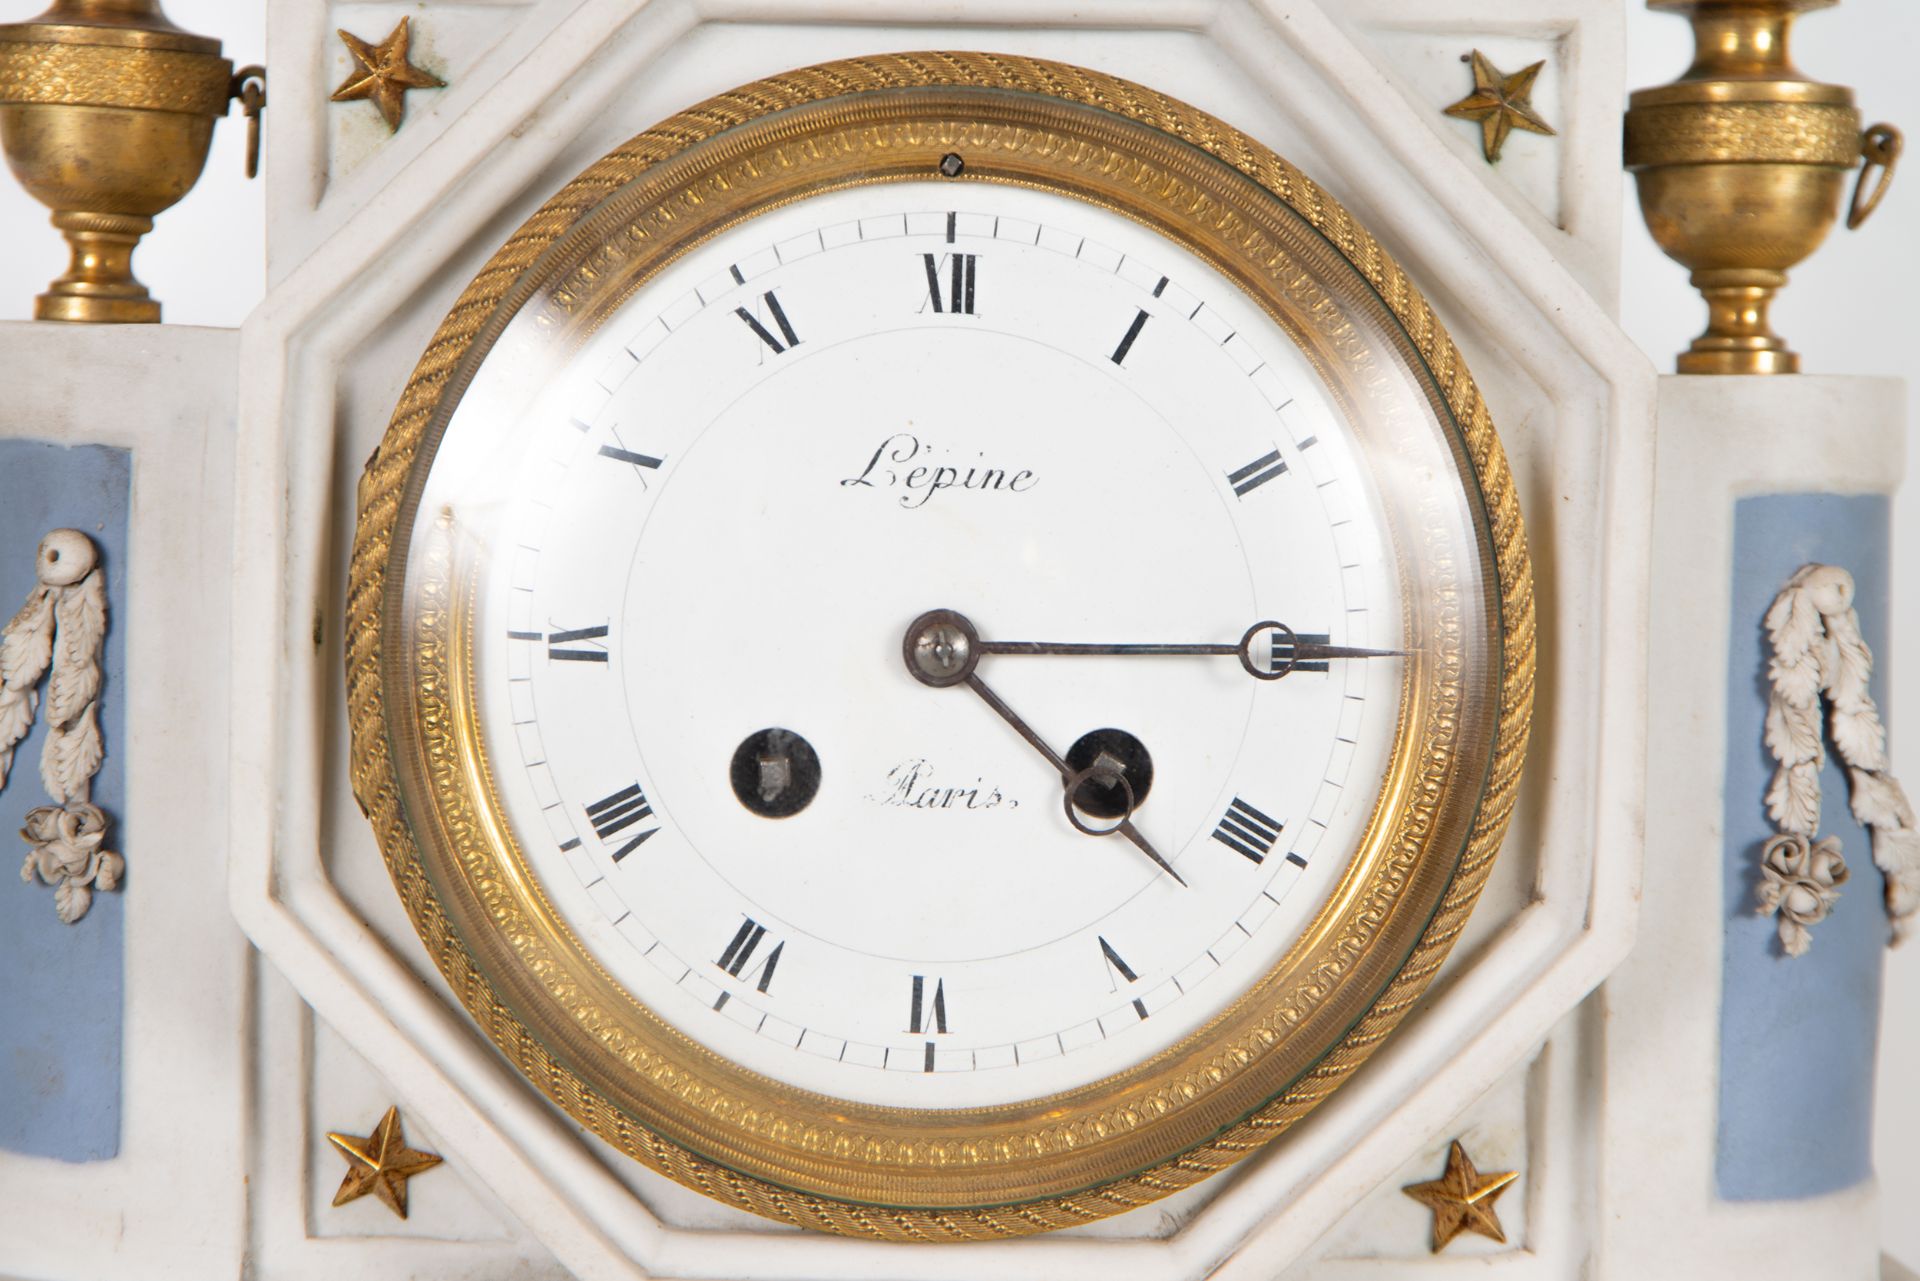 Empire Style Clock in Wedgwood porcelain and gilt bronze, 19th century French school - Image 7 of 11